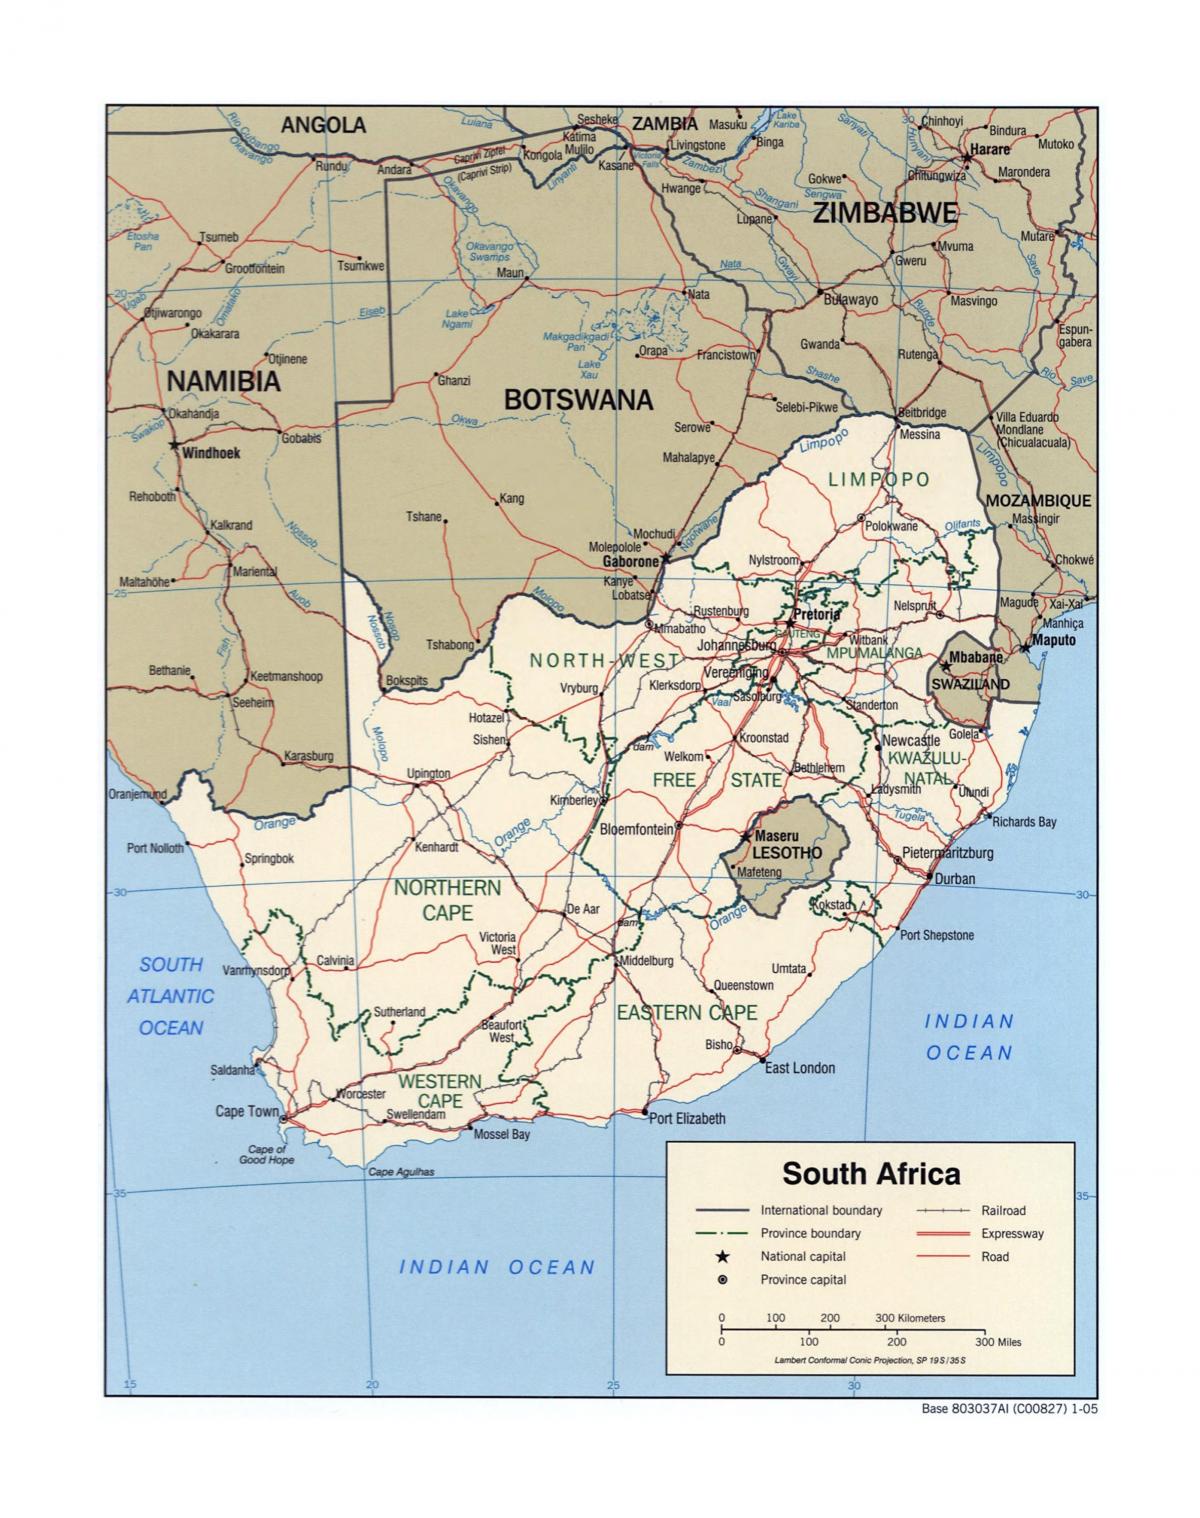 Map of South Africa with main cities